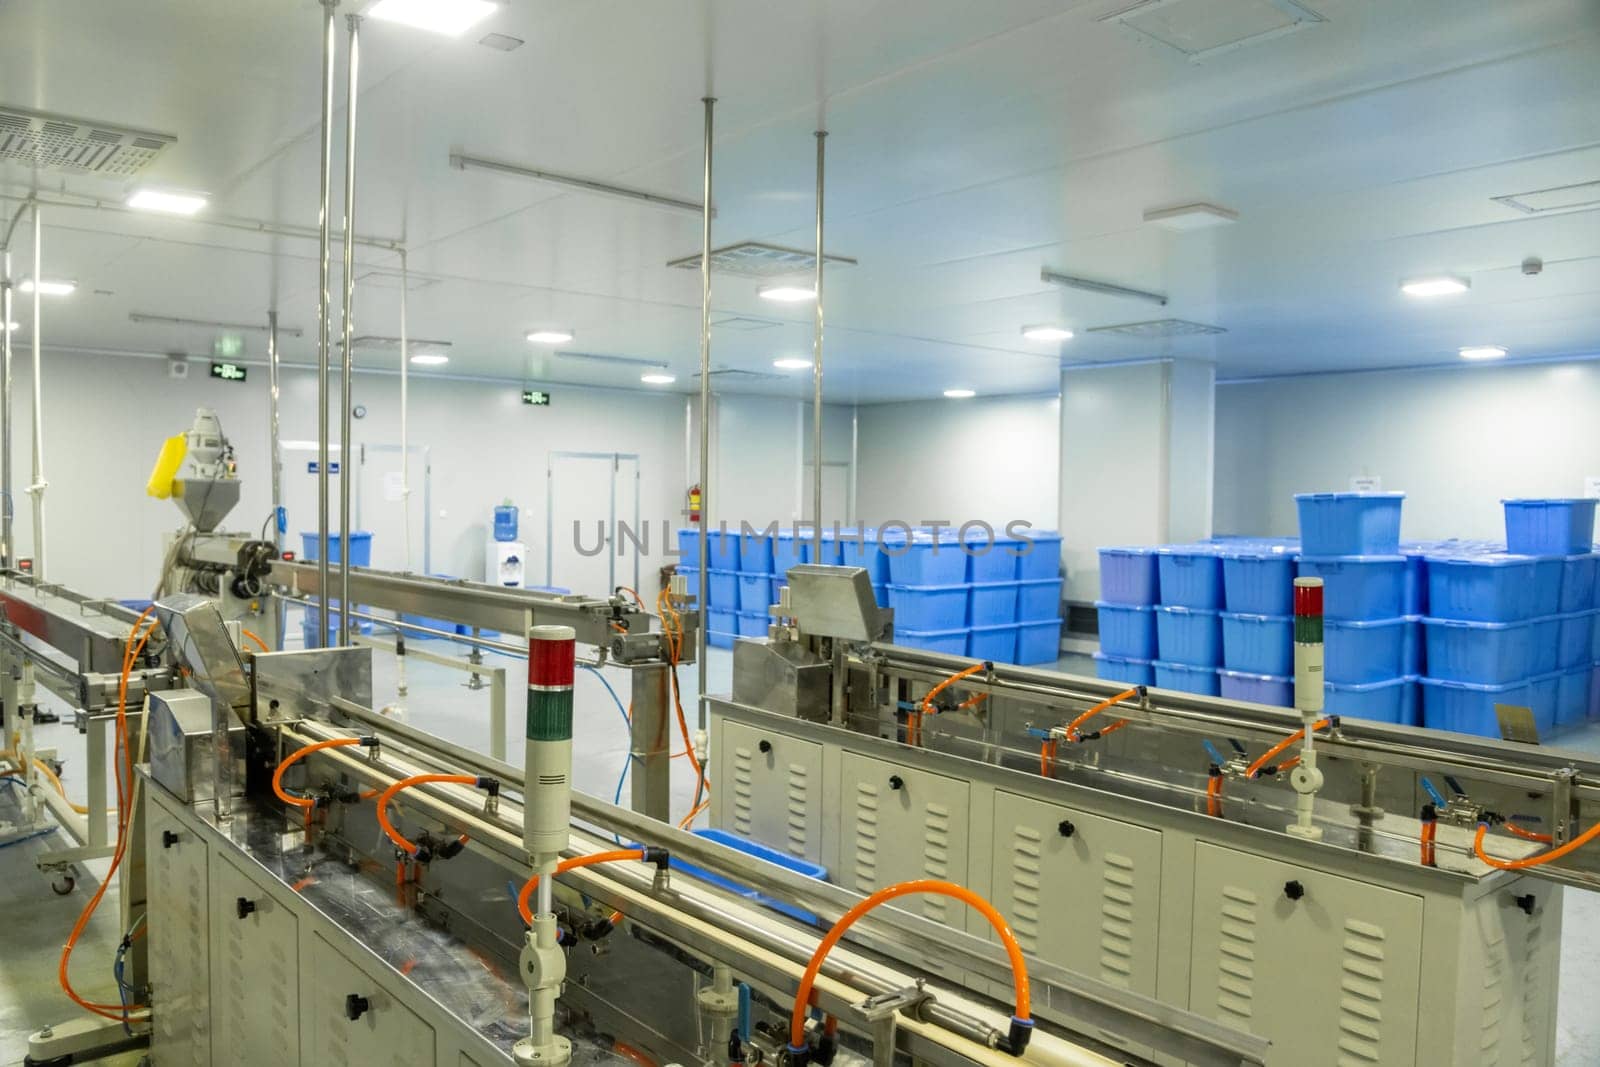 A factory of production of medical syringes and droppers, with equipment and blue containers in the background by A_Karim